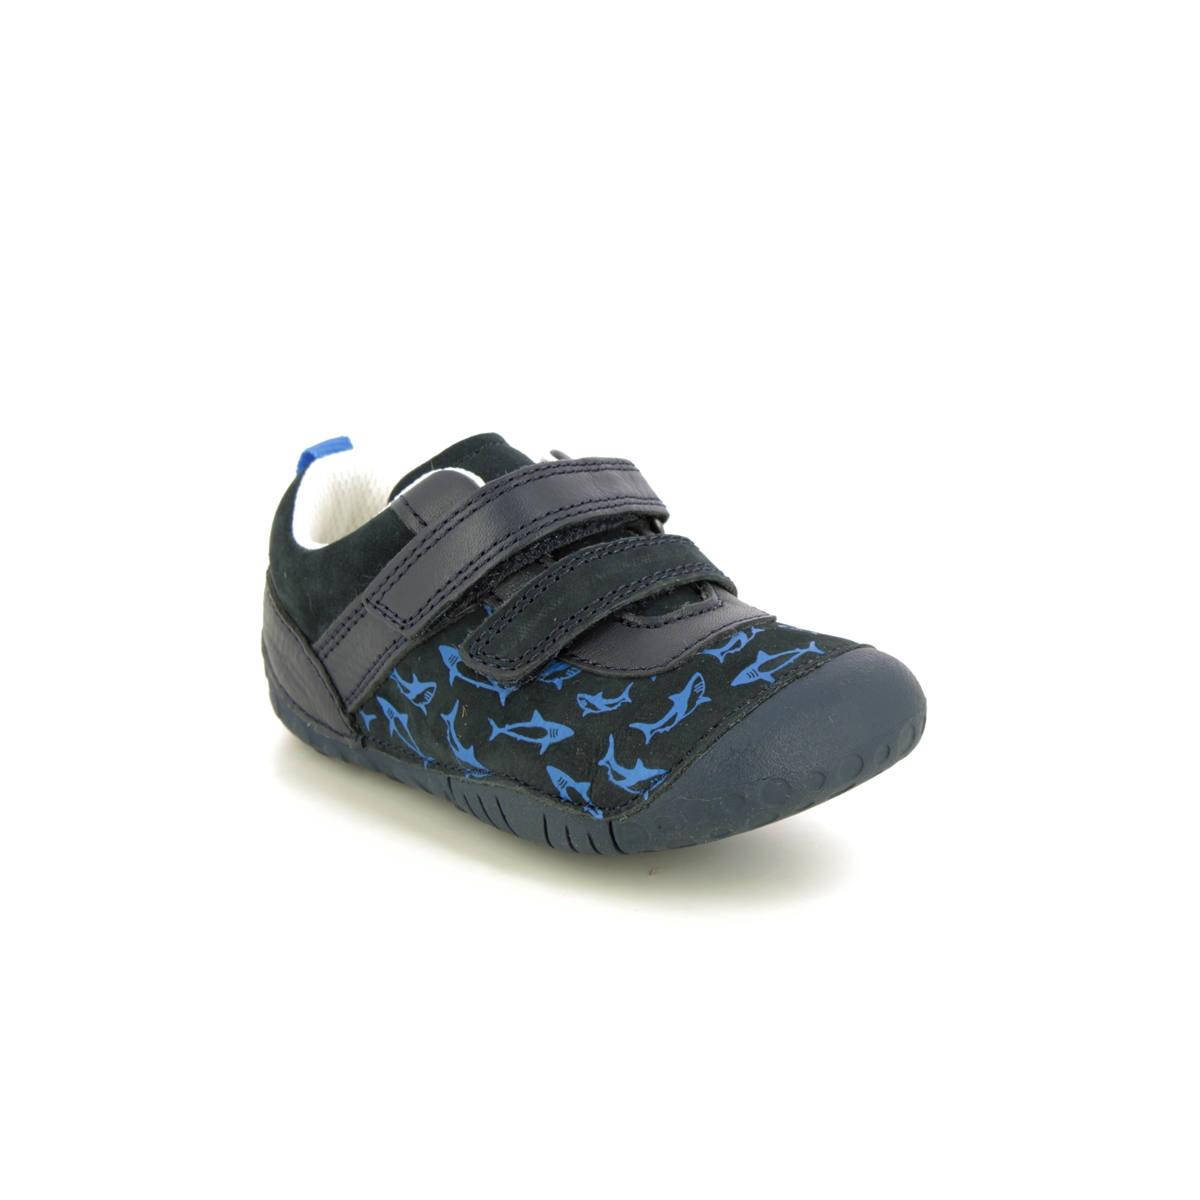 Start Rite - Little Fin In Navy Leather 0777-97G In Size 4 In Plain Navy Leather Boys First And Toddler Shoes  In Navy Leather For kids